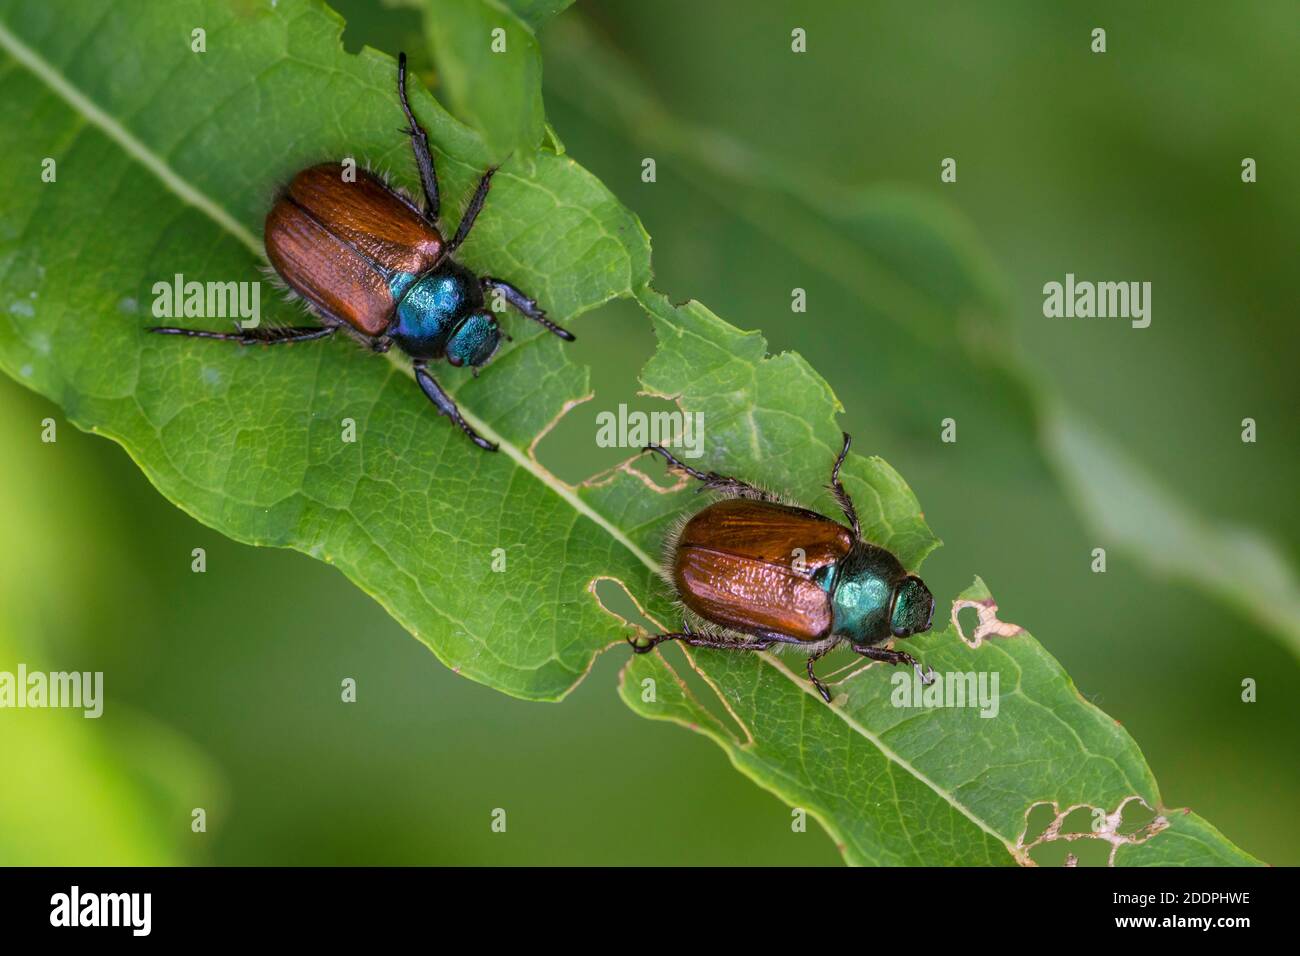 garden chafer, garden foliage beetle (Phyllopertha horticola, Phylloperta horticola), two garden chafers on a leaf, dorsal view, Germany Stock Photo